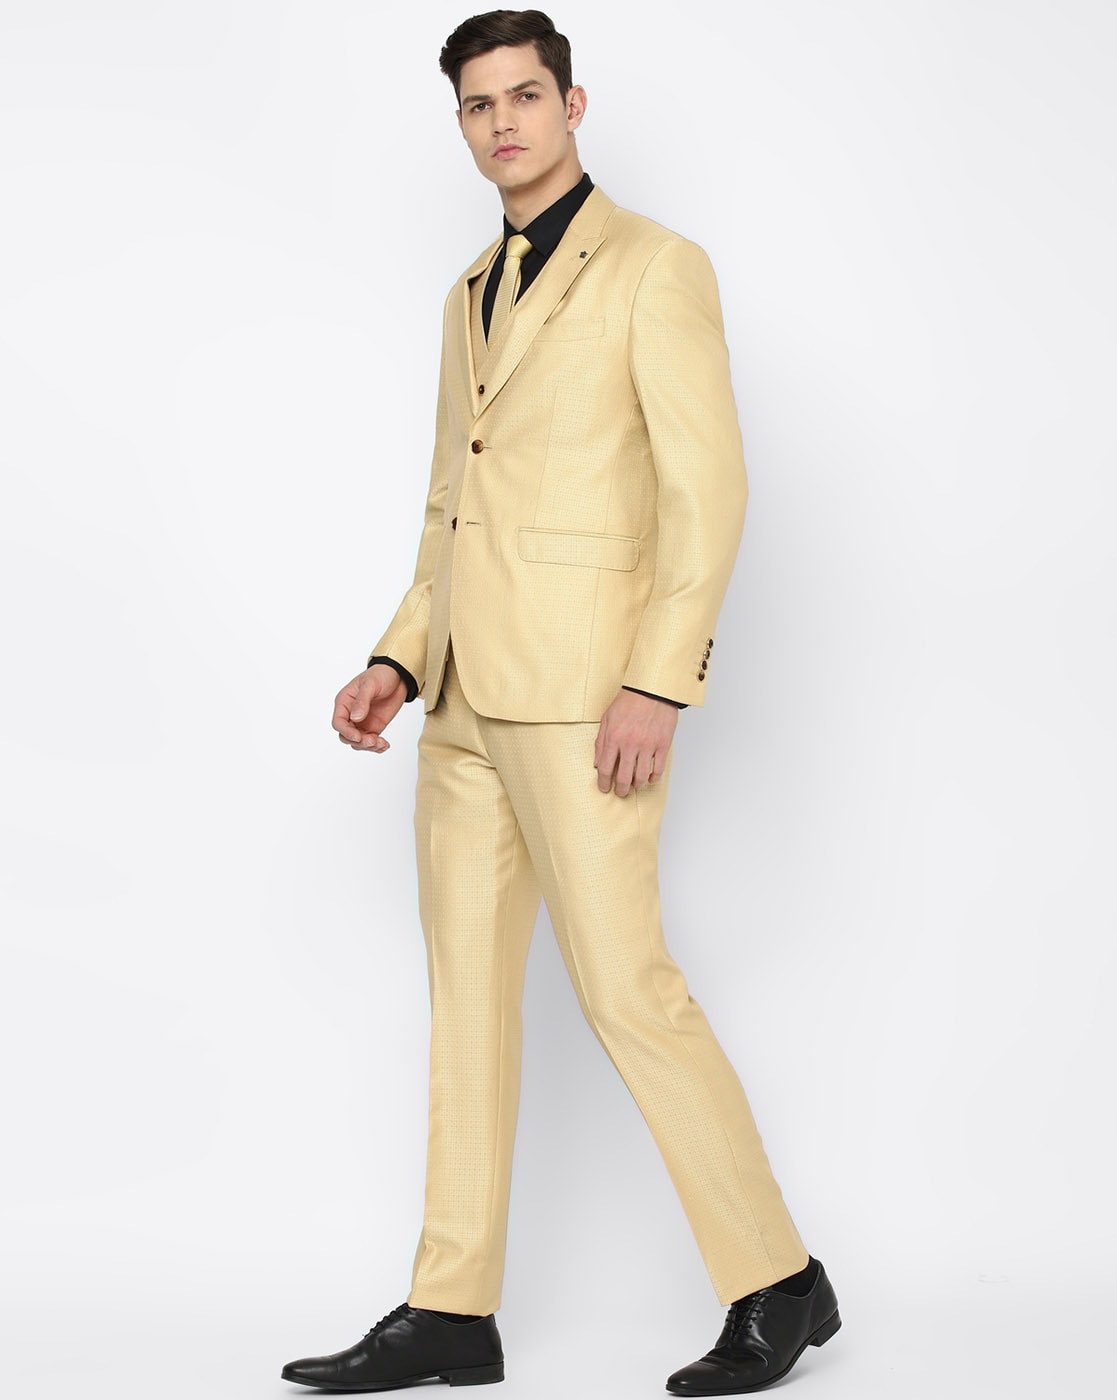 Verno Slim Fit Striped Double Breasted Grey & Yellow Suit – MCR TAILOR